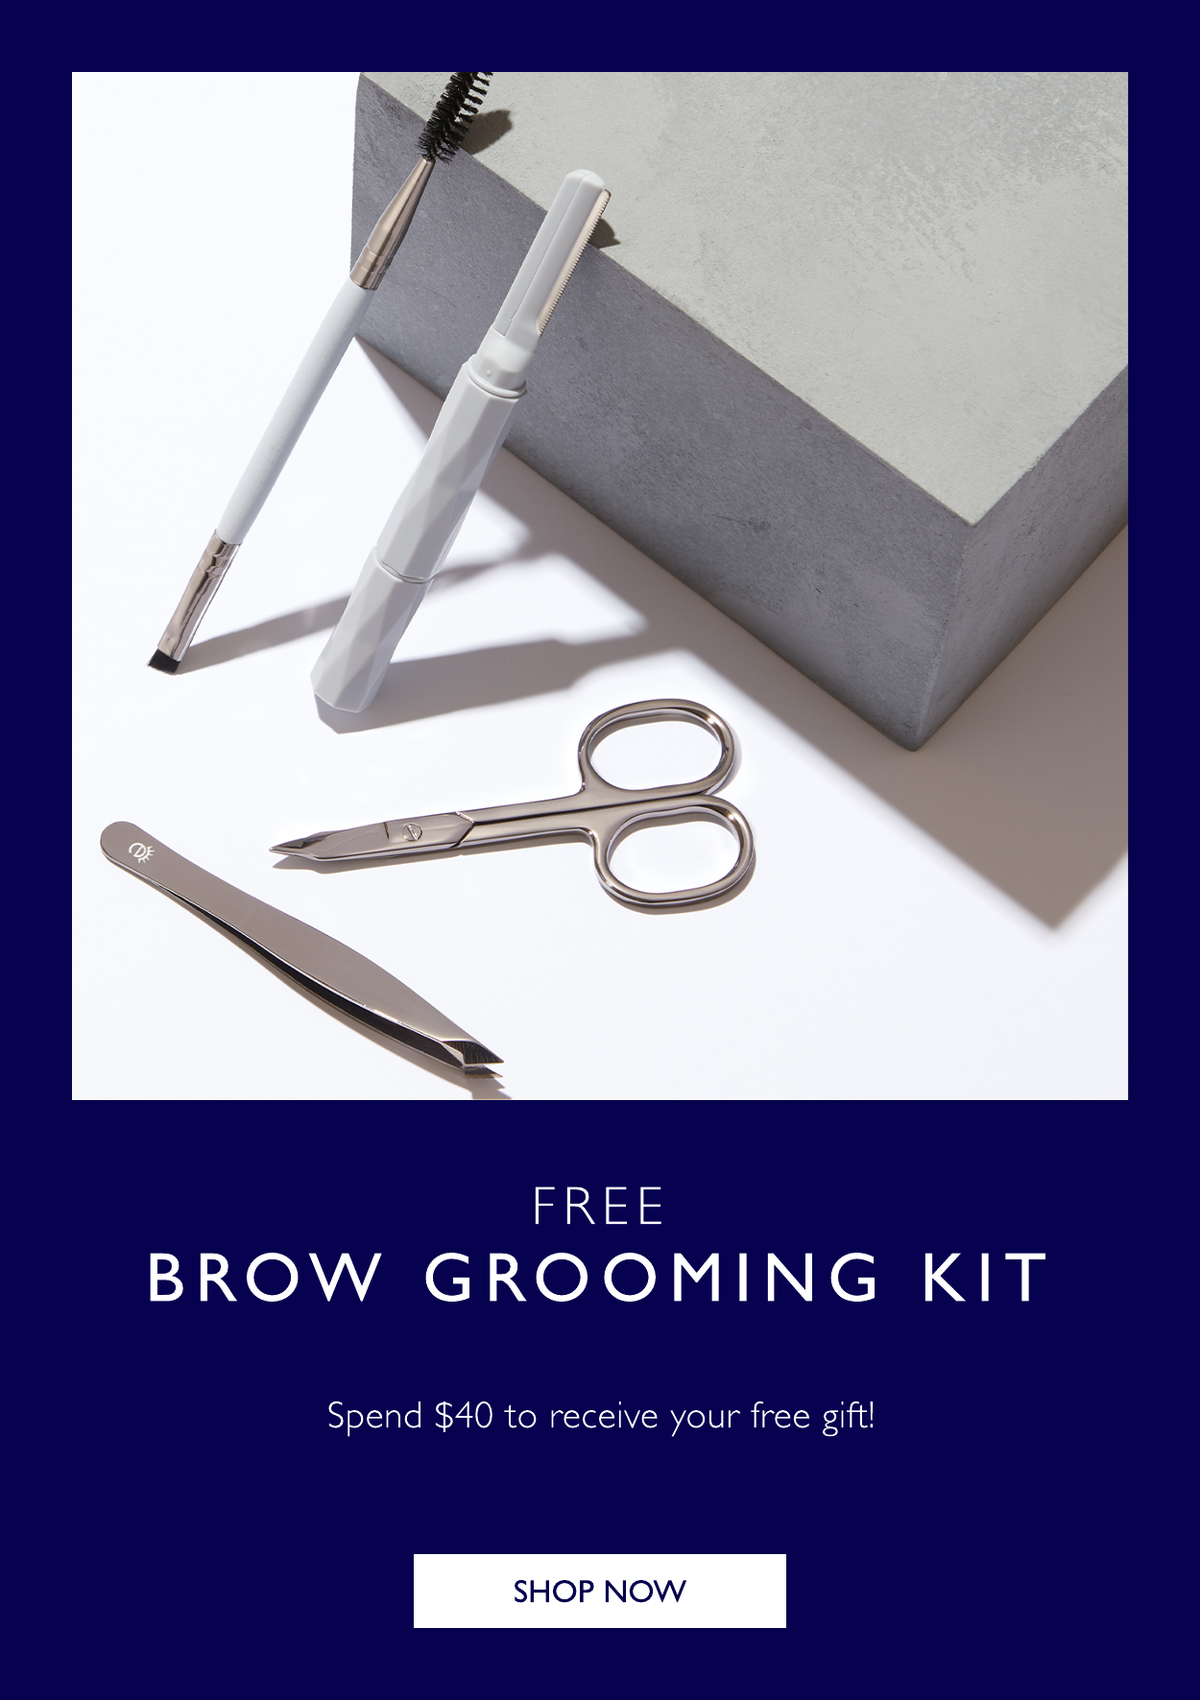 Free Gift of Brow Grooming Kit when you spend $40